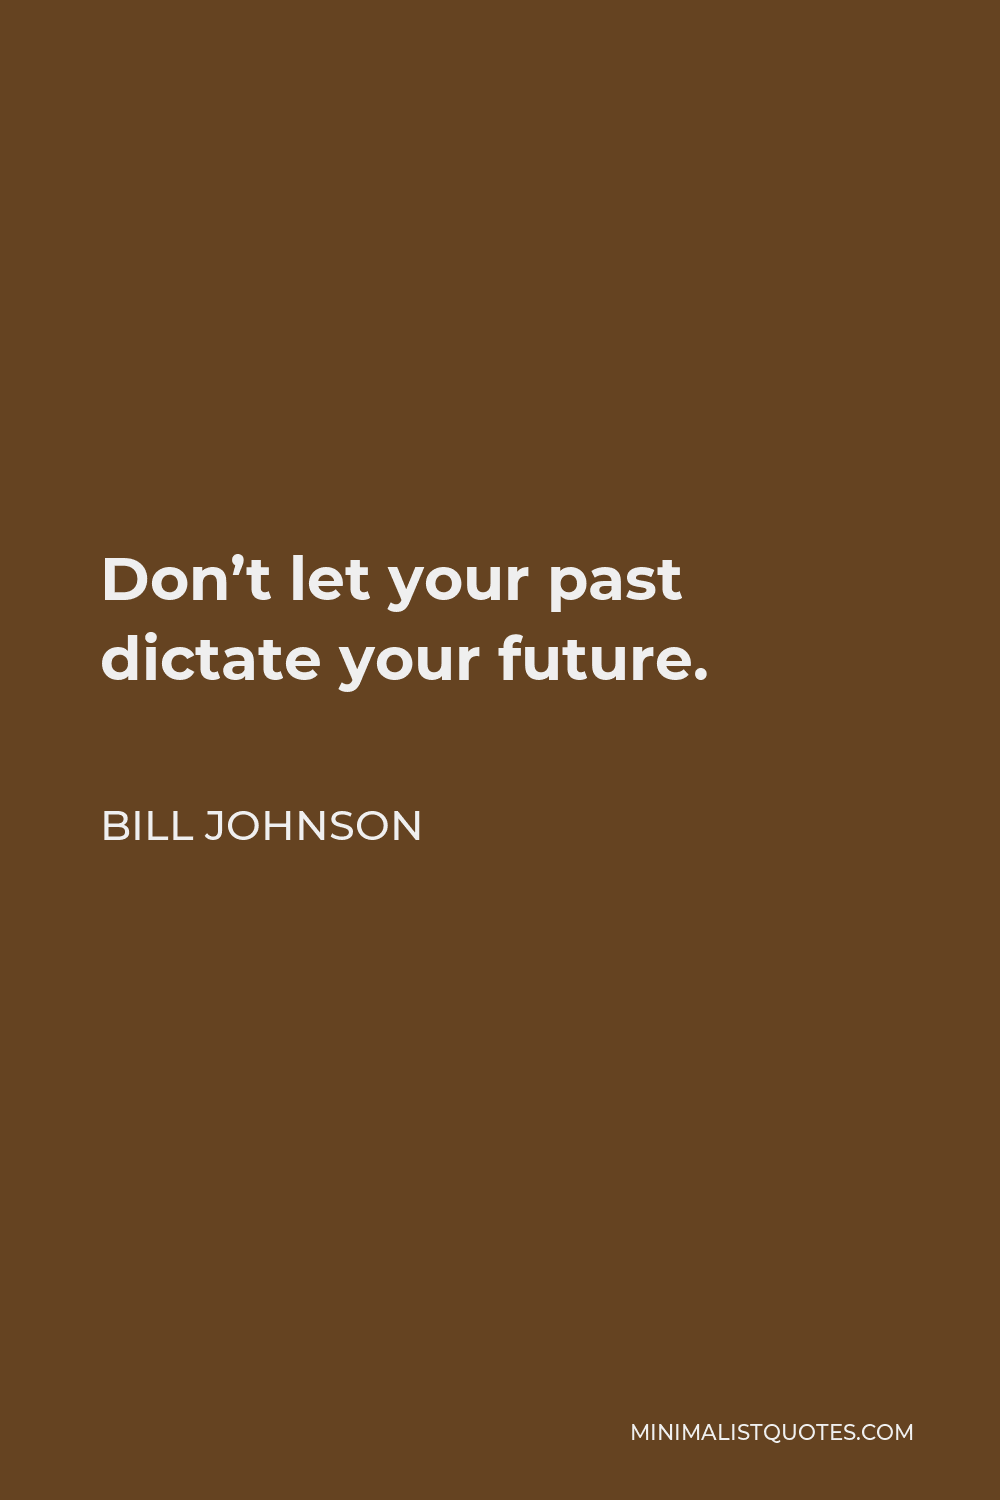 Bill Johnson Quote - Don’t let your past dictate your future.